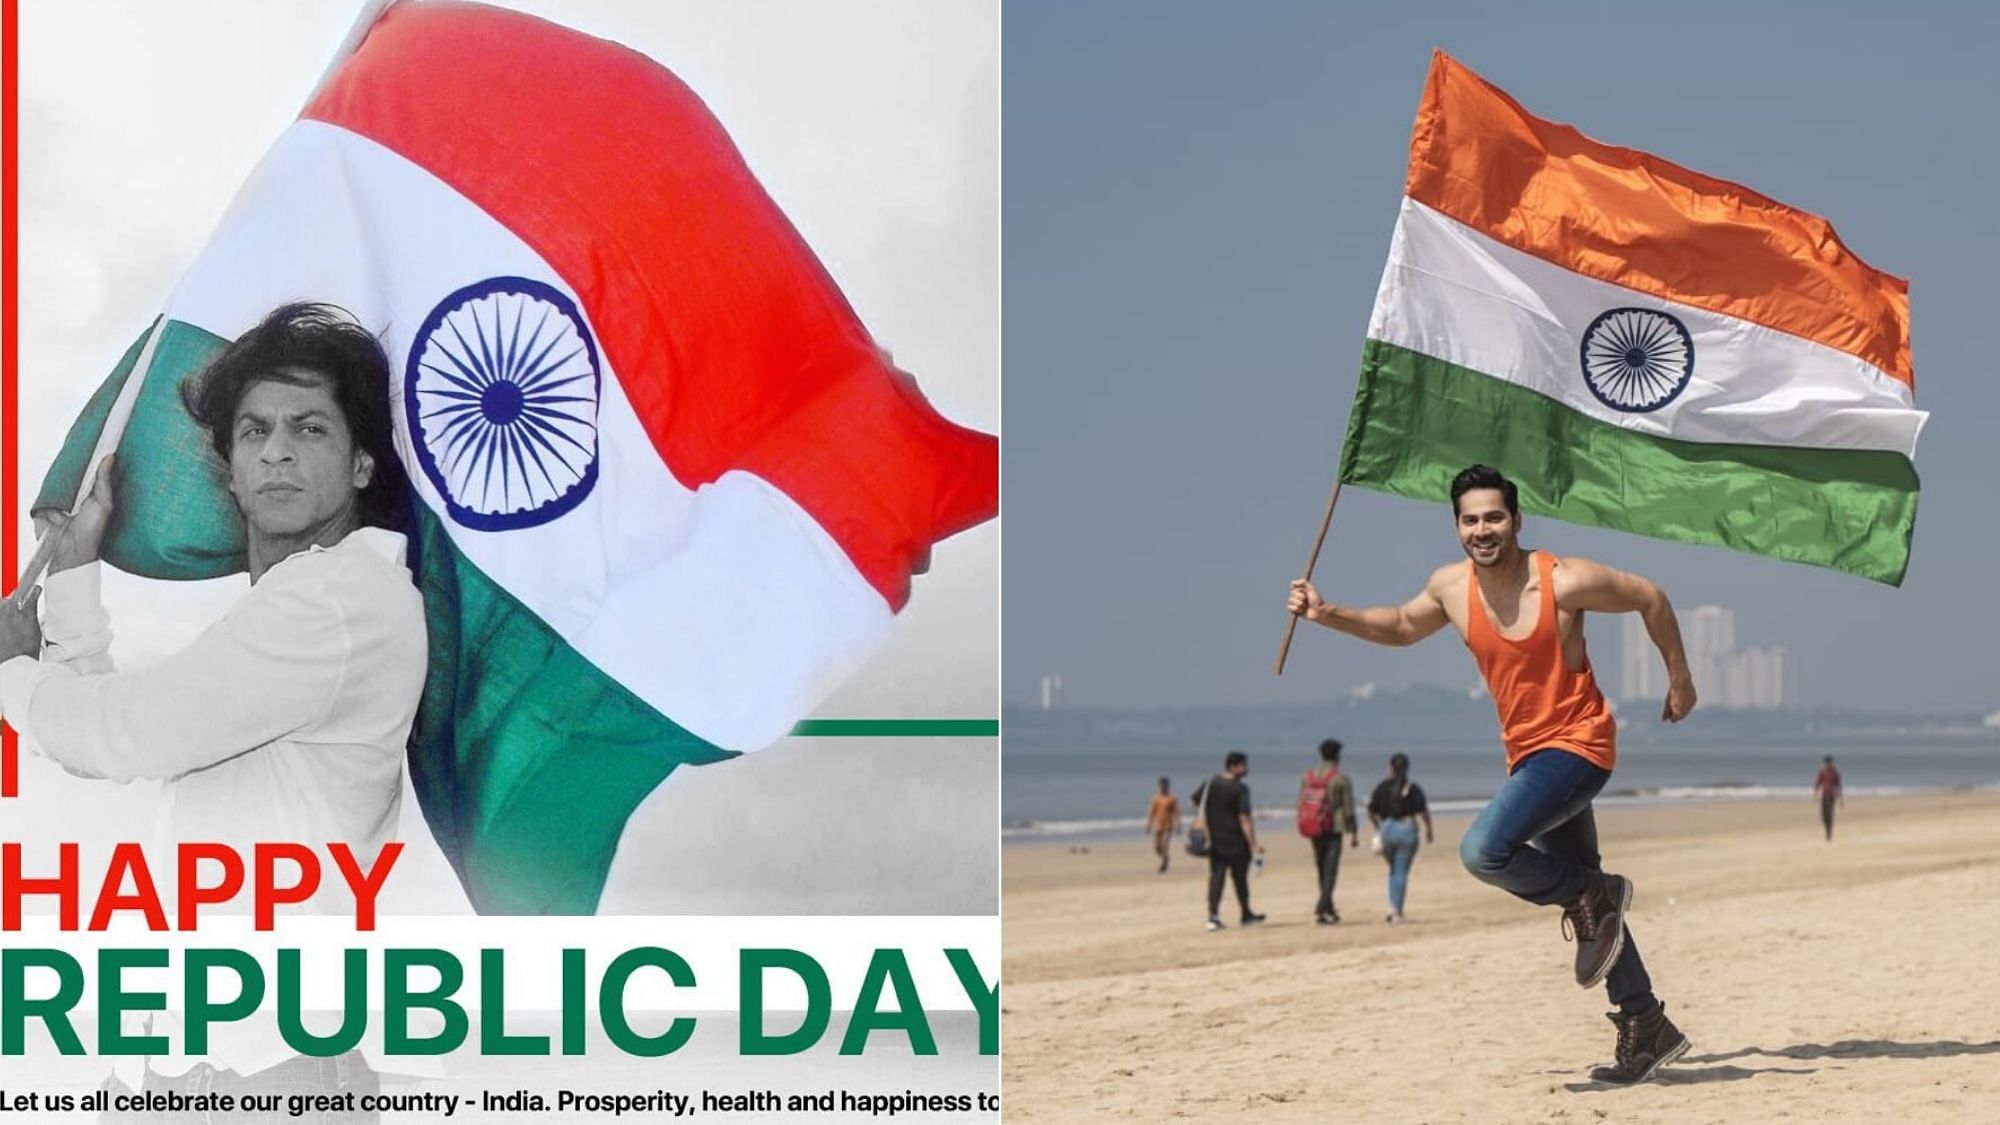 SRK, Big B, Varun Dhawan and a slew of other stars send wishes for Republic Day.